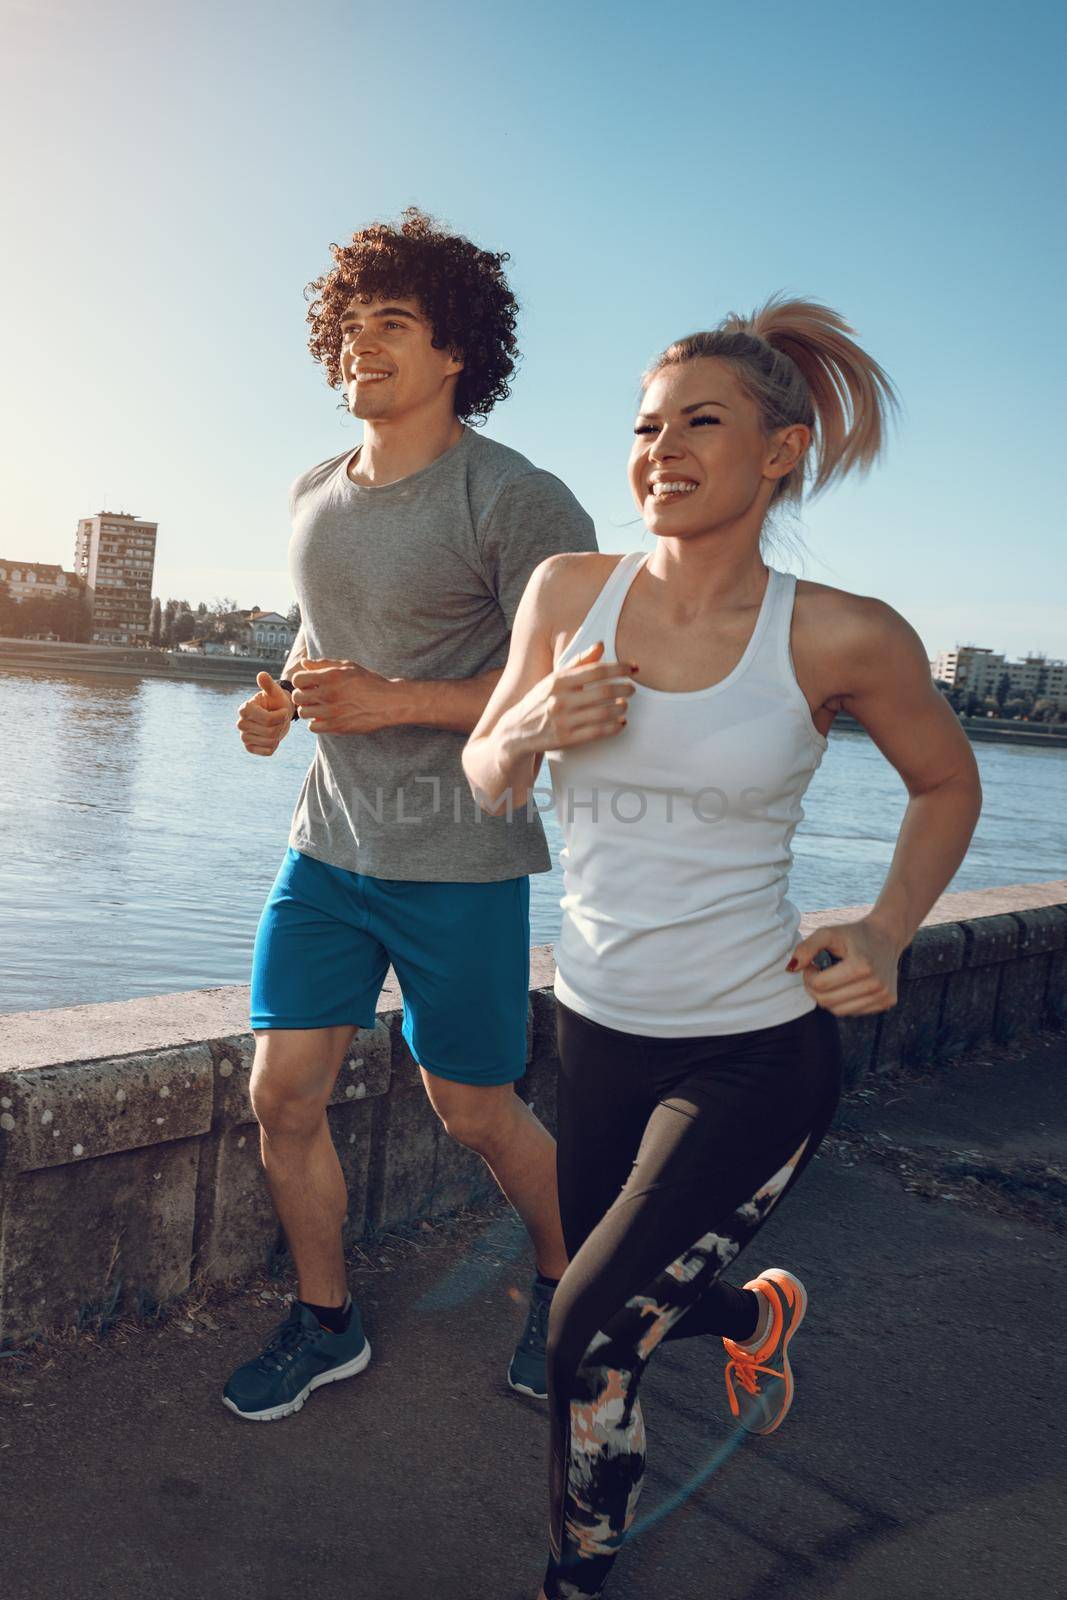 Young happy runners couple training outdoors by the river, working out in nature against blue sky with sunrise light.